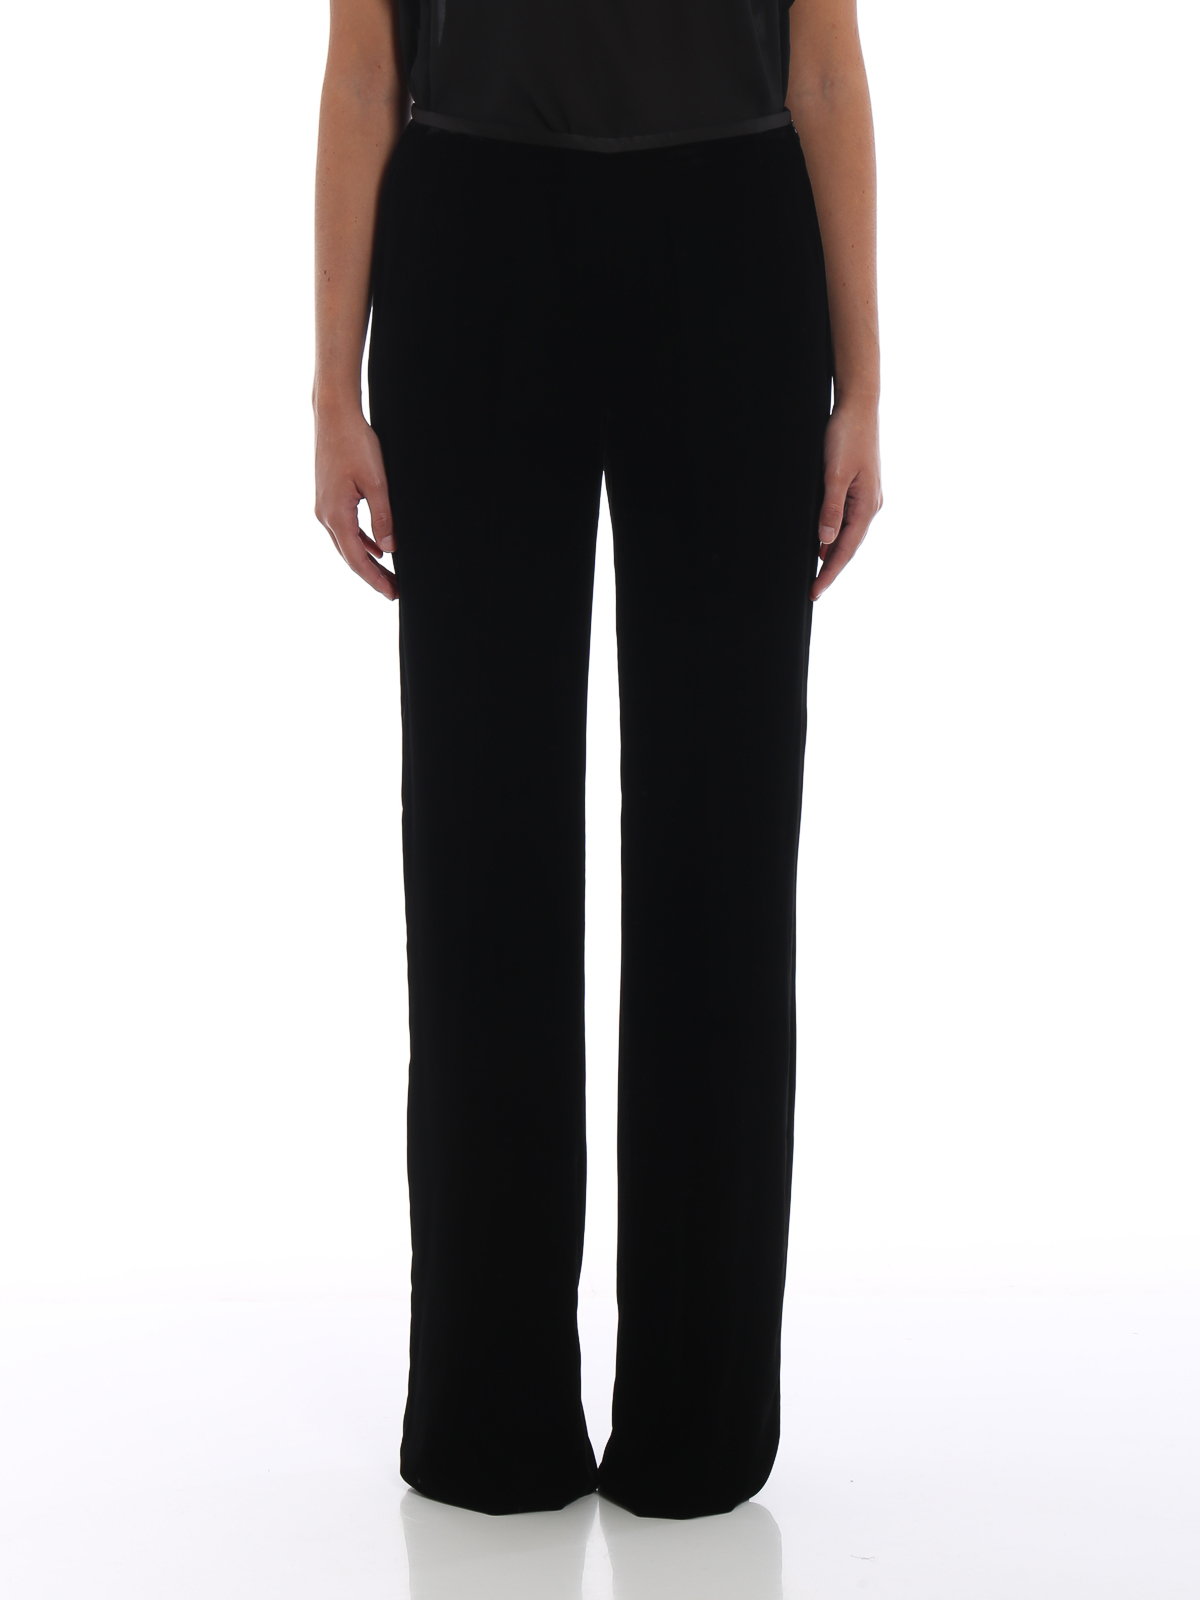 Men's Armani Exchange Formal pants from $56 | Lyst